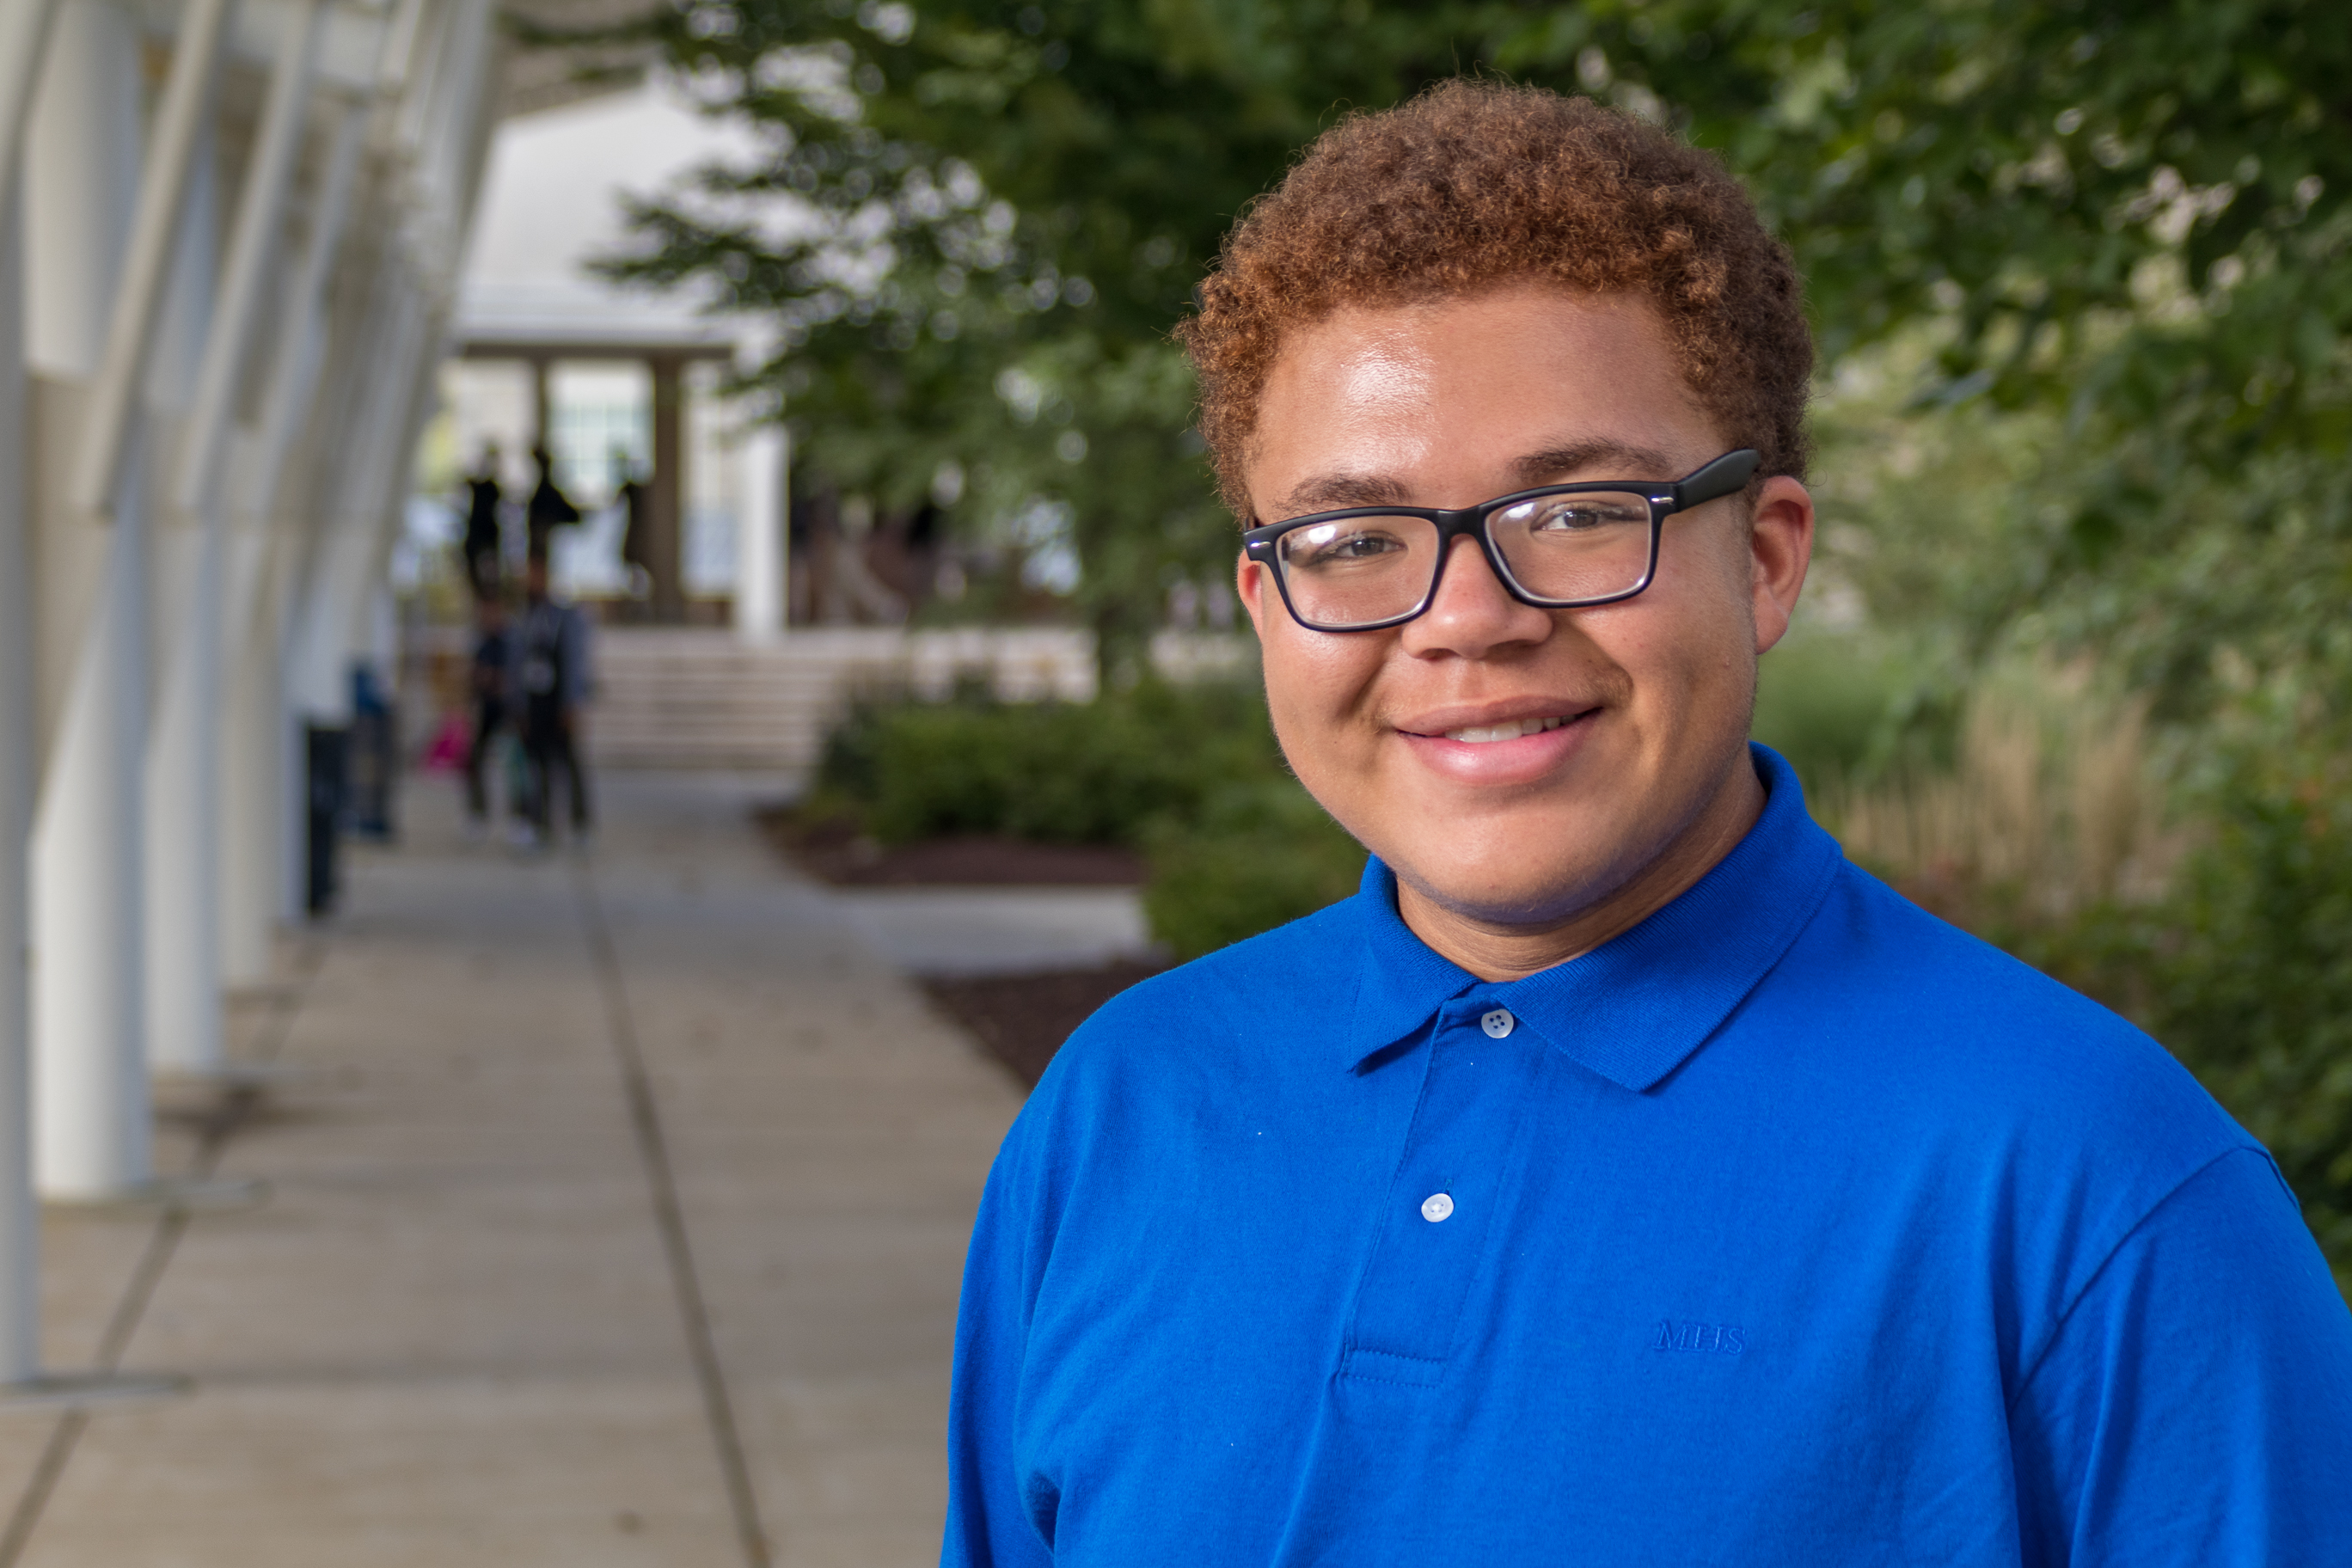 When Patrick enrolled at Milton Hershey School as a sophomore, he didn’t realize how much health and wellness would impact his future, his academics, and his confidence.